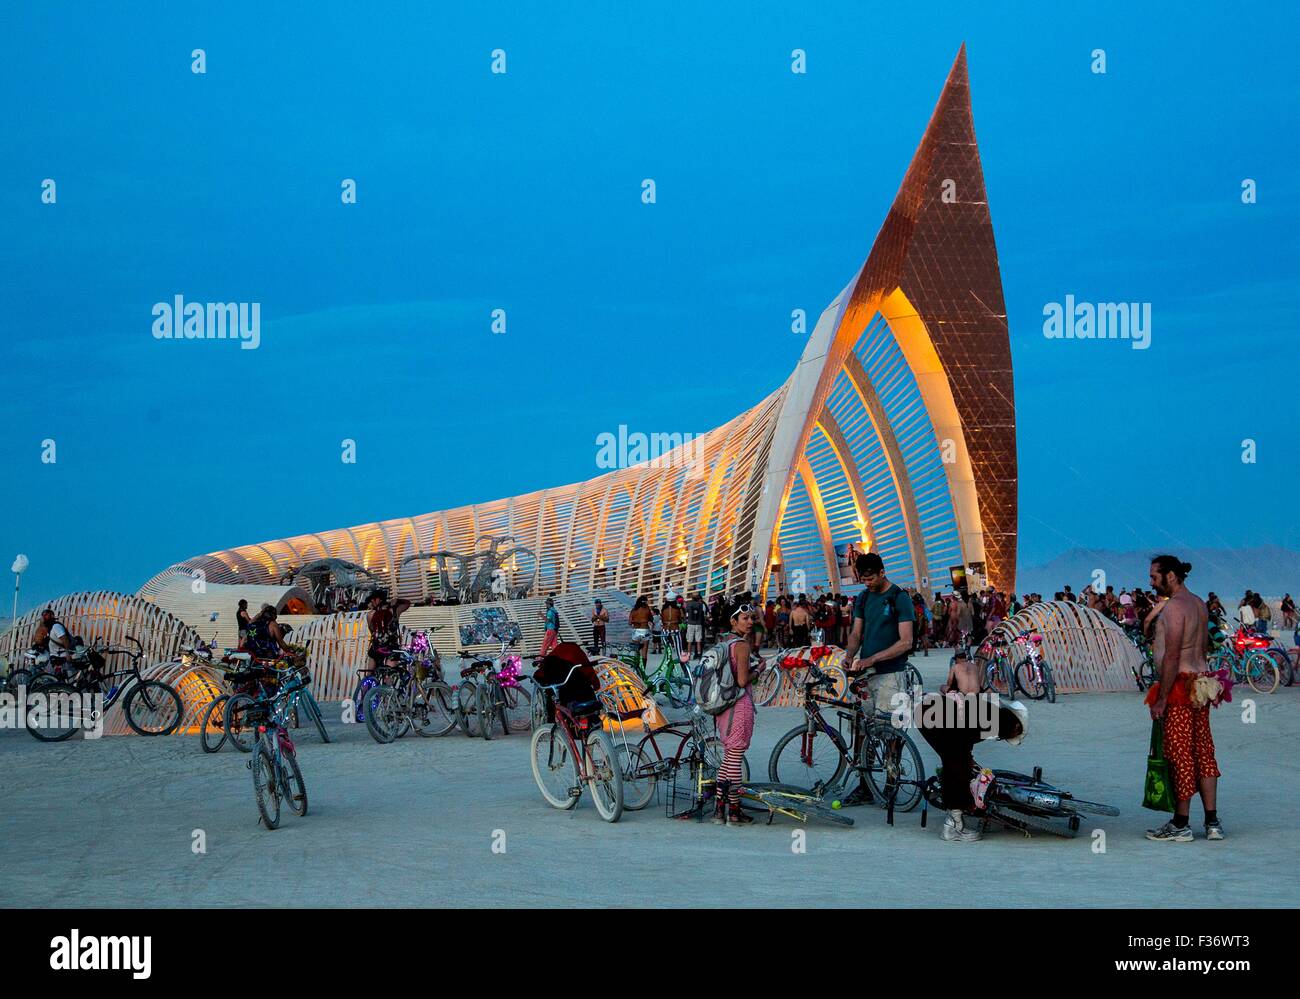 Burner bikes and art cars cruise the playa during the annual Burning Man festival in the desert August 29, 2012 in Black Rock City, Nevada. Stock Photo